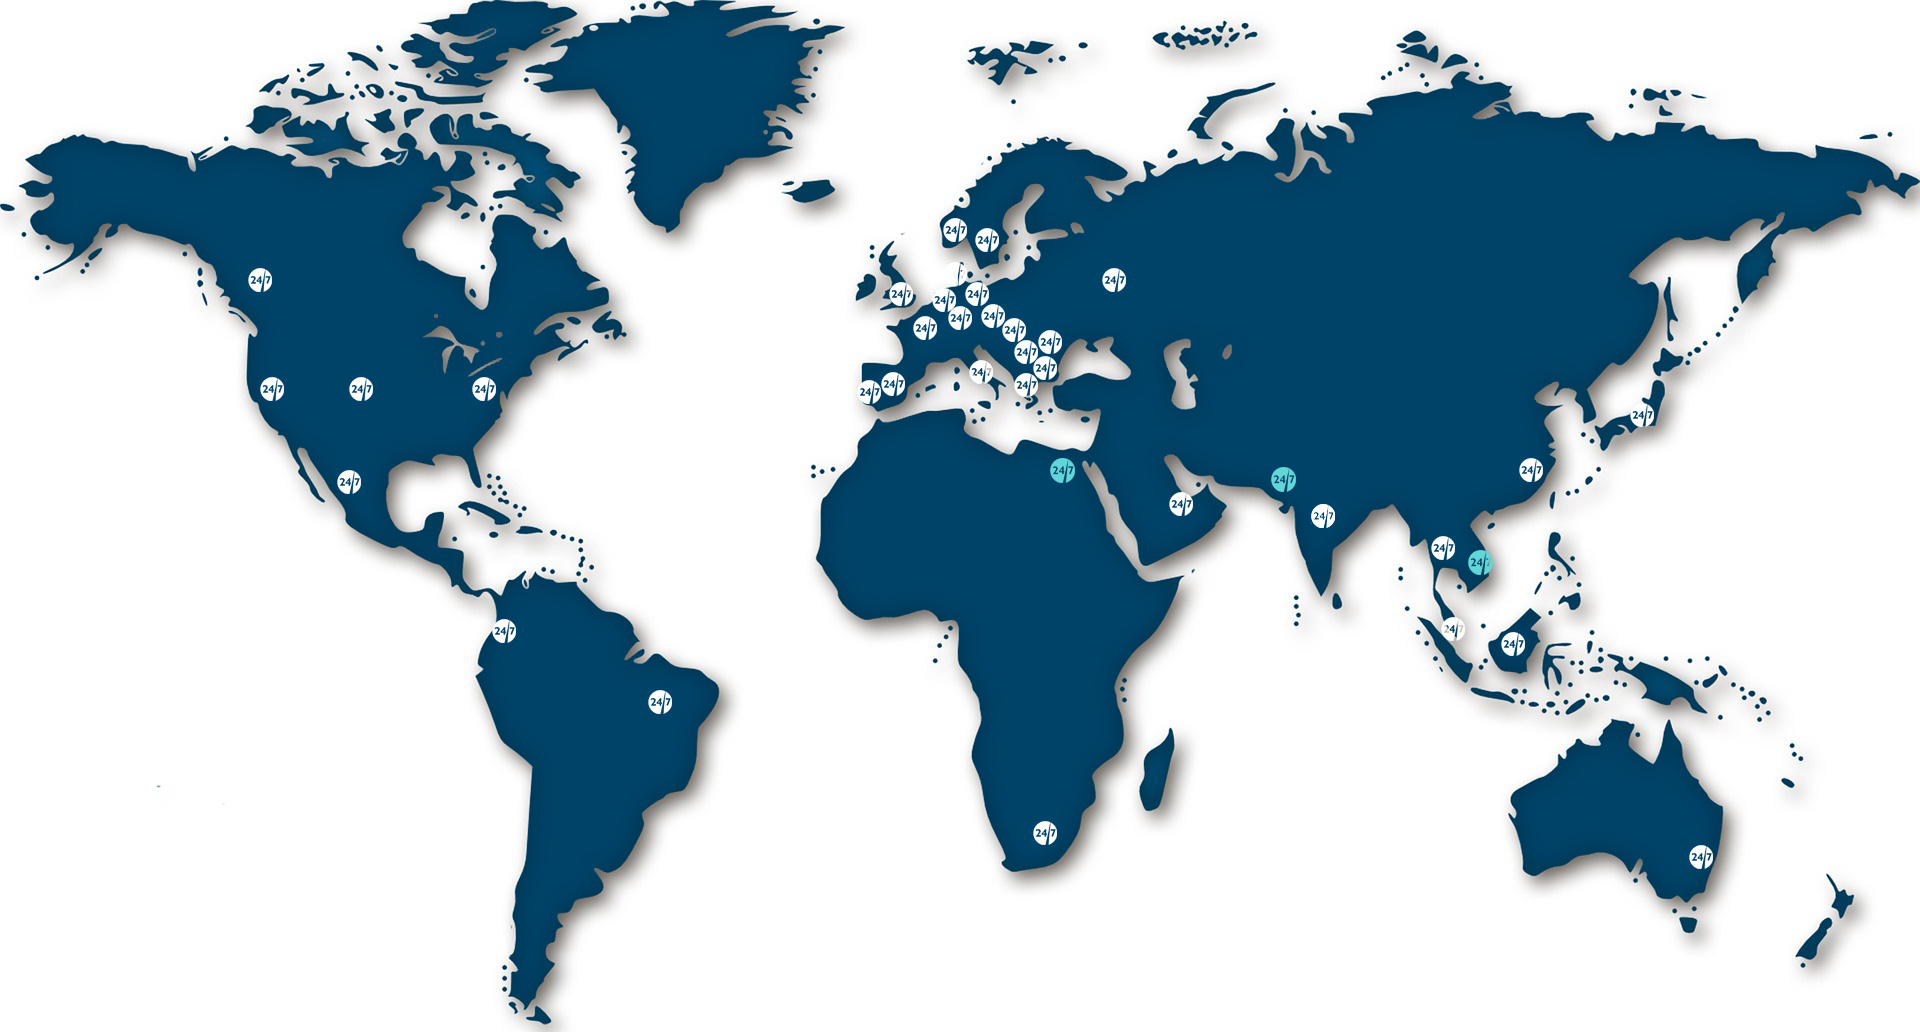 map of the world in dark blue with white logo roundels in UX24/7 locations